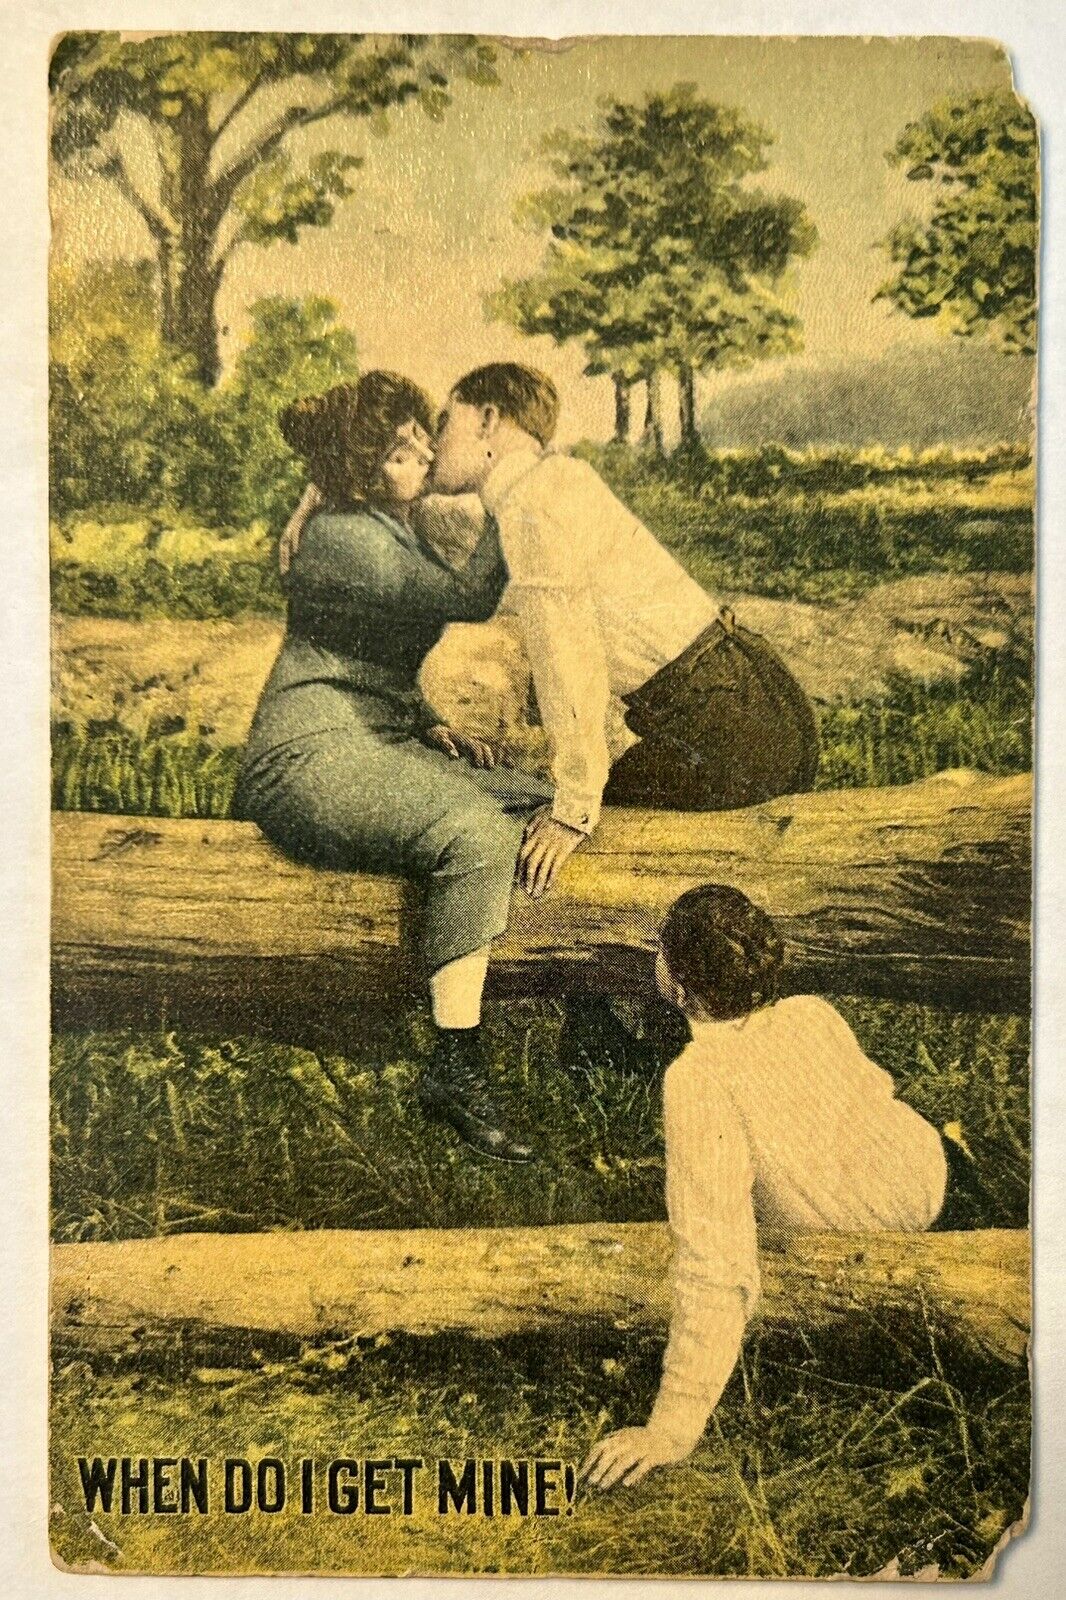 Vintage Early 1900s Postcard. Man Watches Couple Kiss. “When Do I Get Mine”